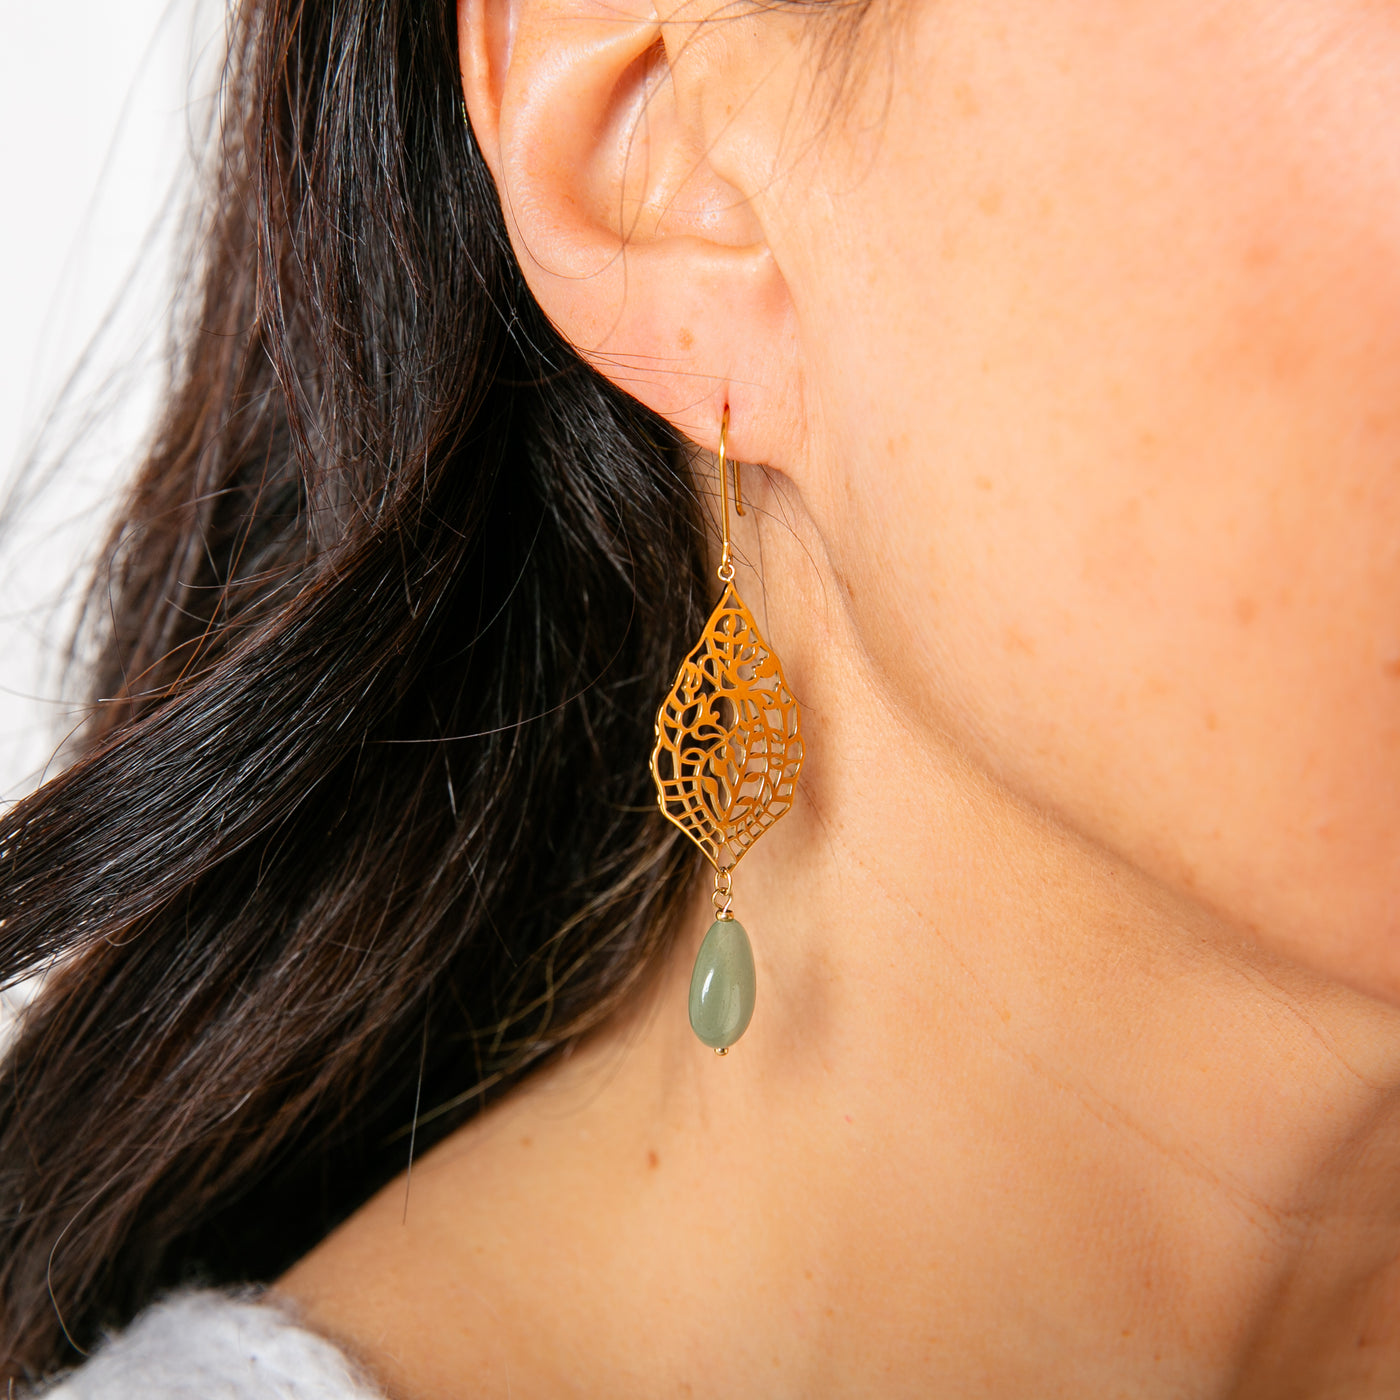 The Bonnie Earrings in green in a beautiful teardrop shape with leaf and flower detailing